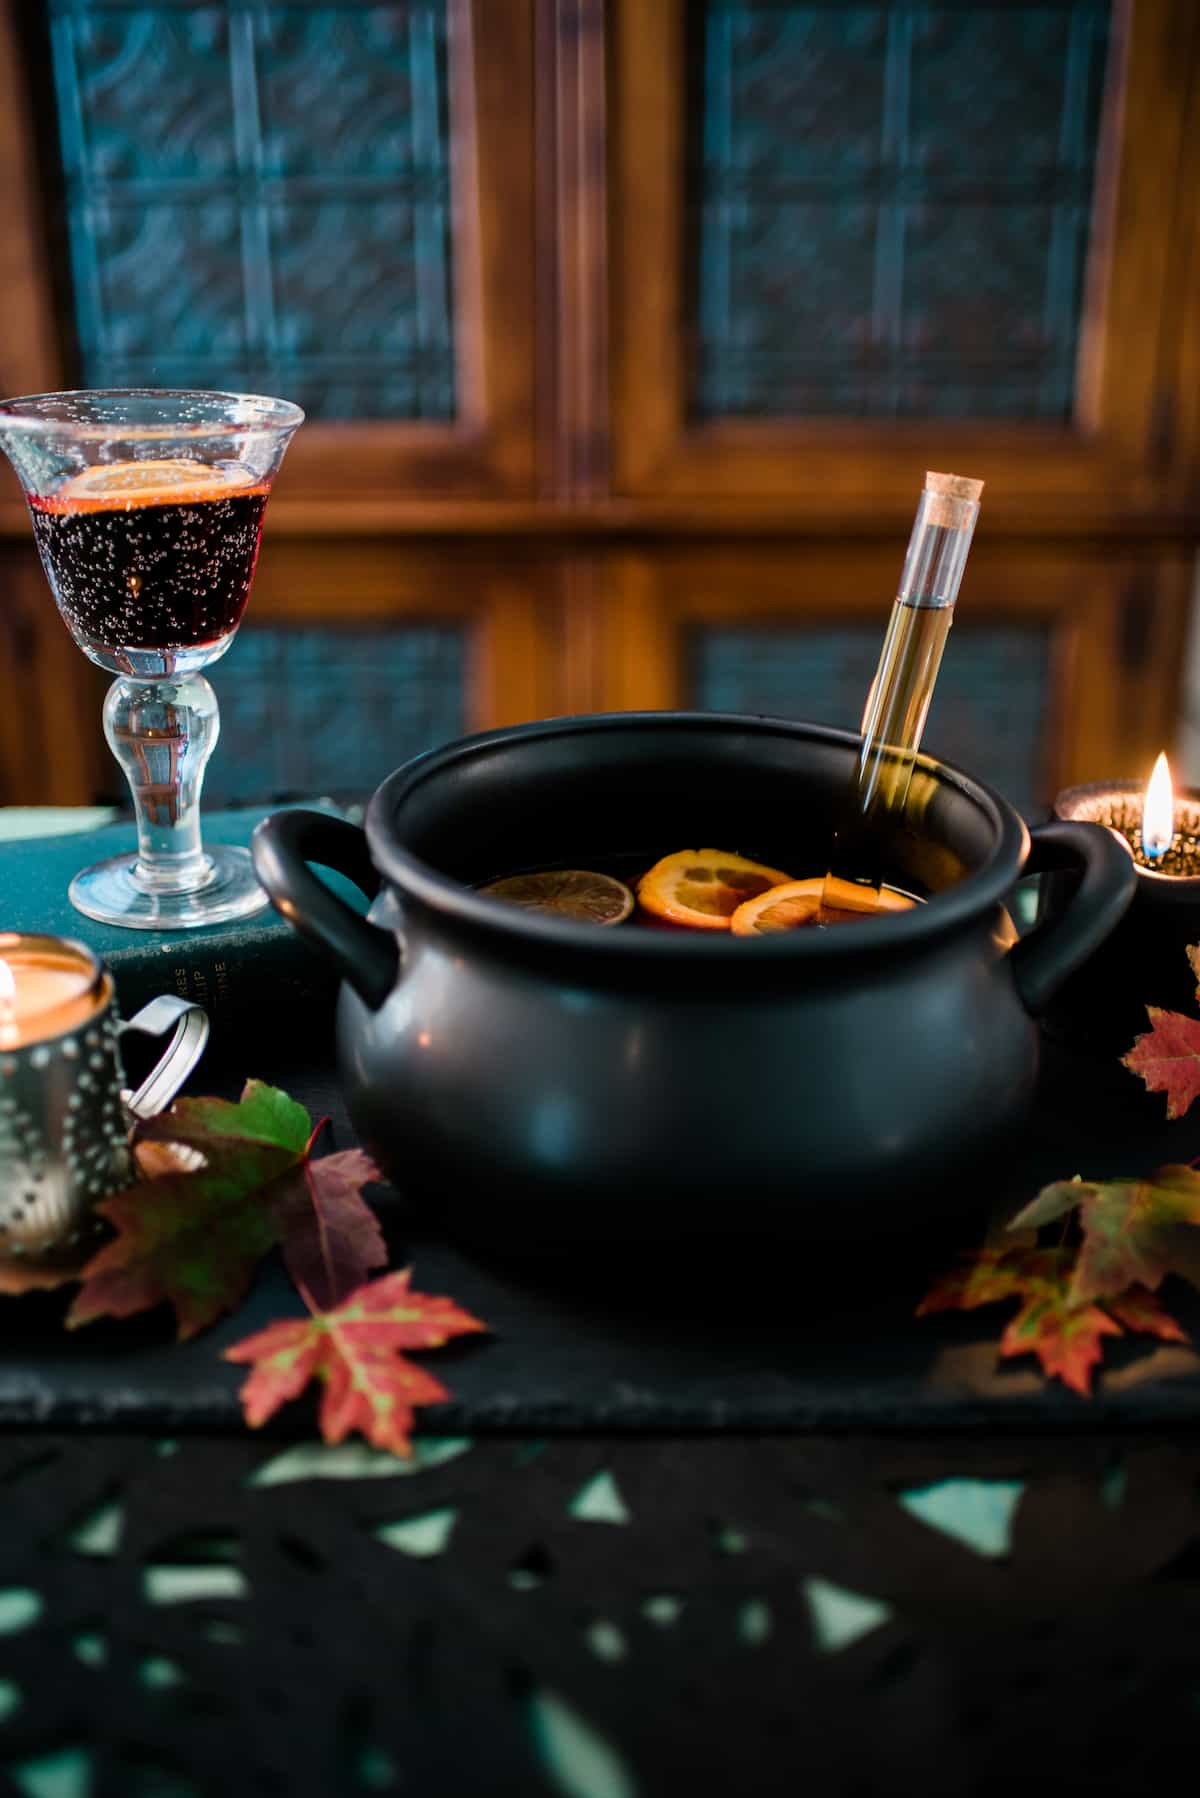 halloween tablescape with a black witches cauldron filled with halloween sangria and a test tube of liquor plus fall leaves and lit candles.